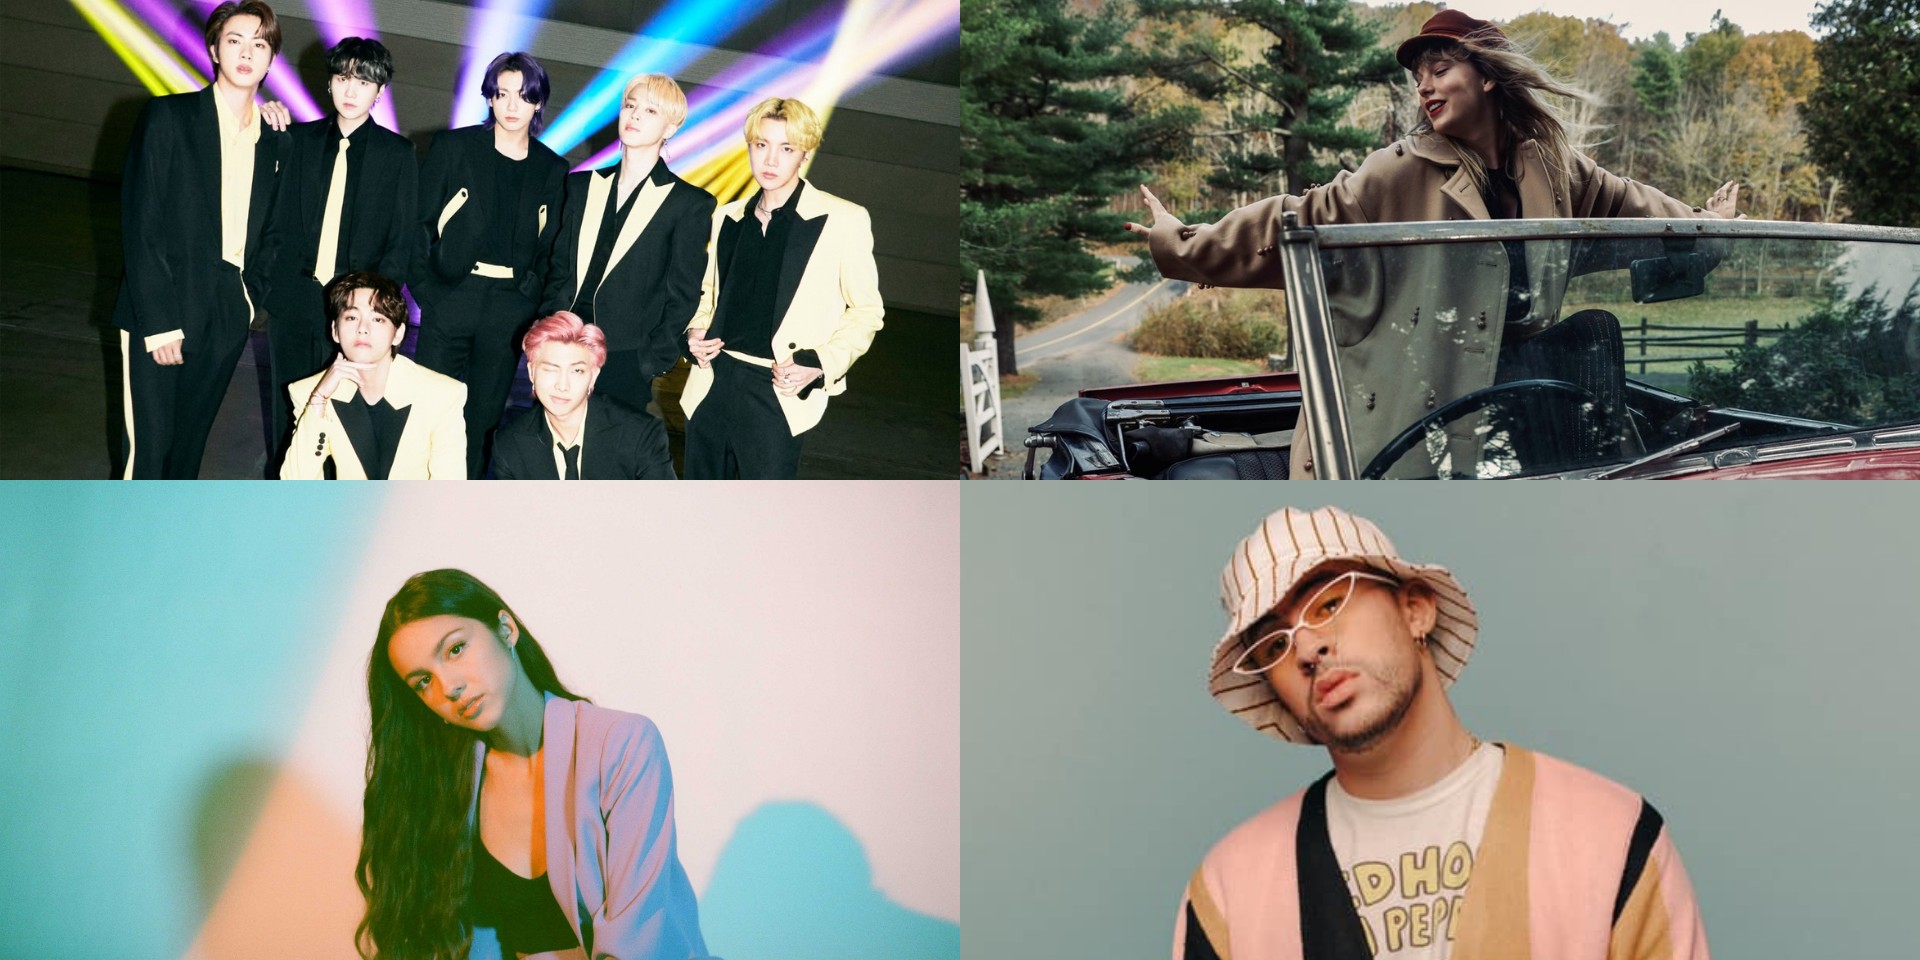 Spotify Wrapped reveals top songs, artists, albums, and podcasts of 2021 – Bad Bunny, Taylor Swift, BTS, Olivia Rodrigo, and more